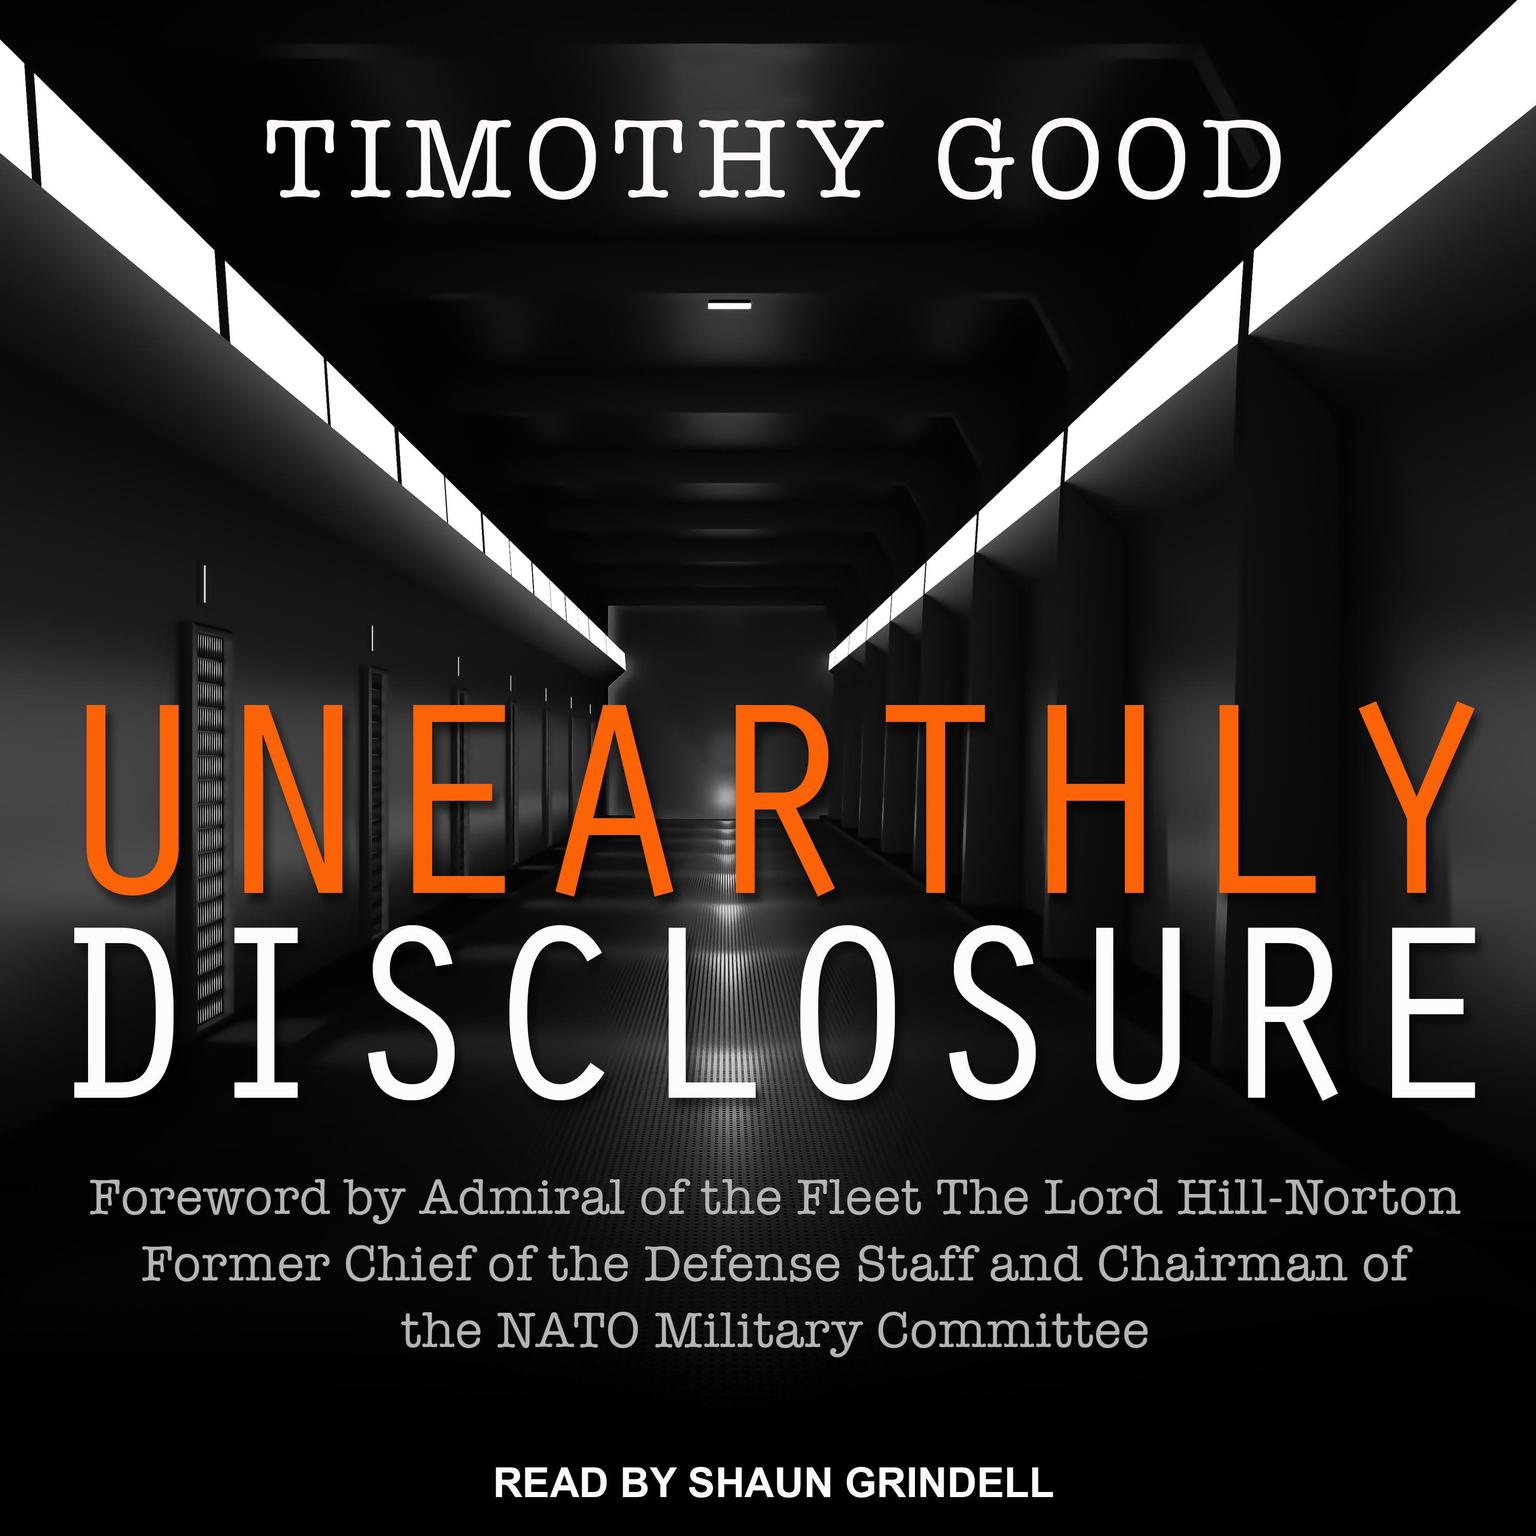 Unearthly Disclosure Audiobook, by Timothy Good